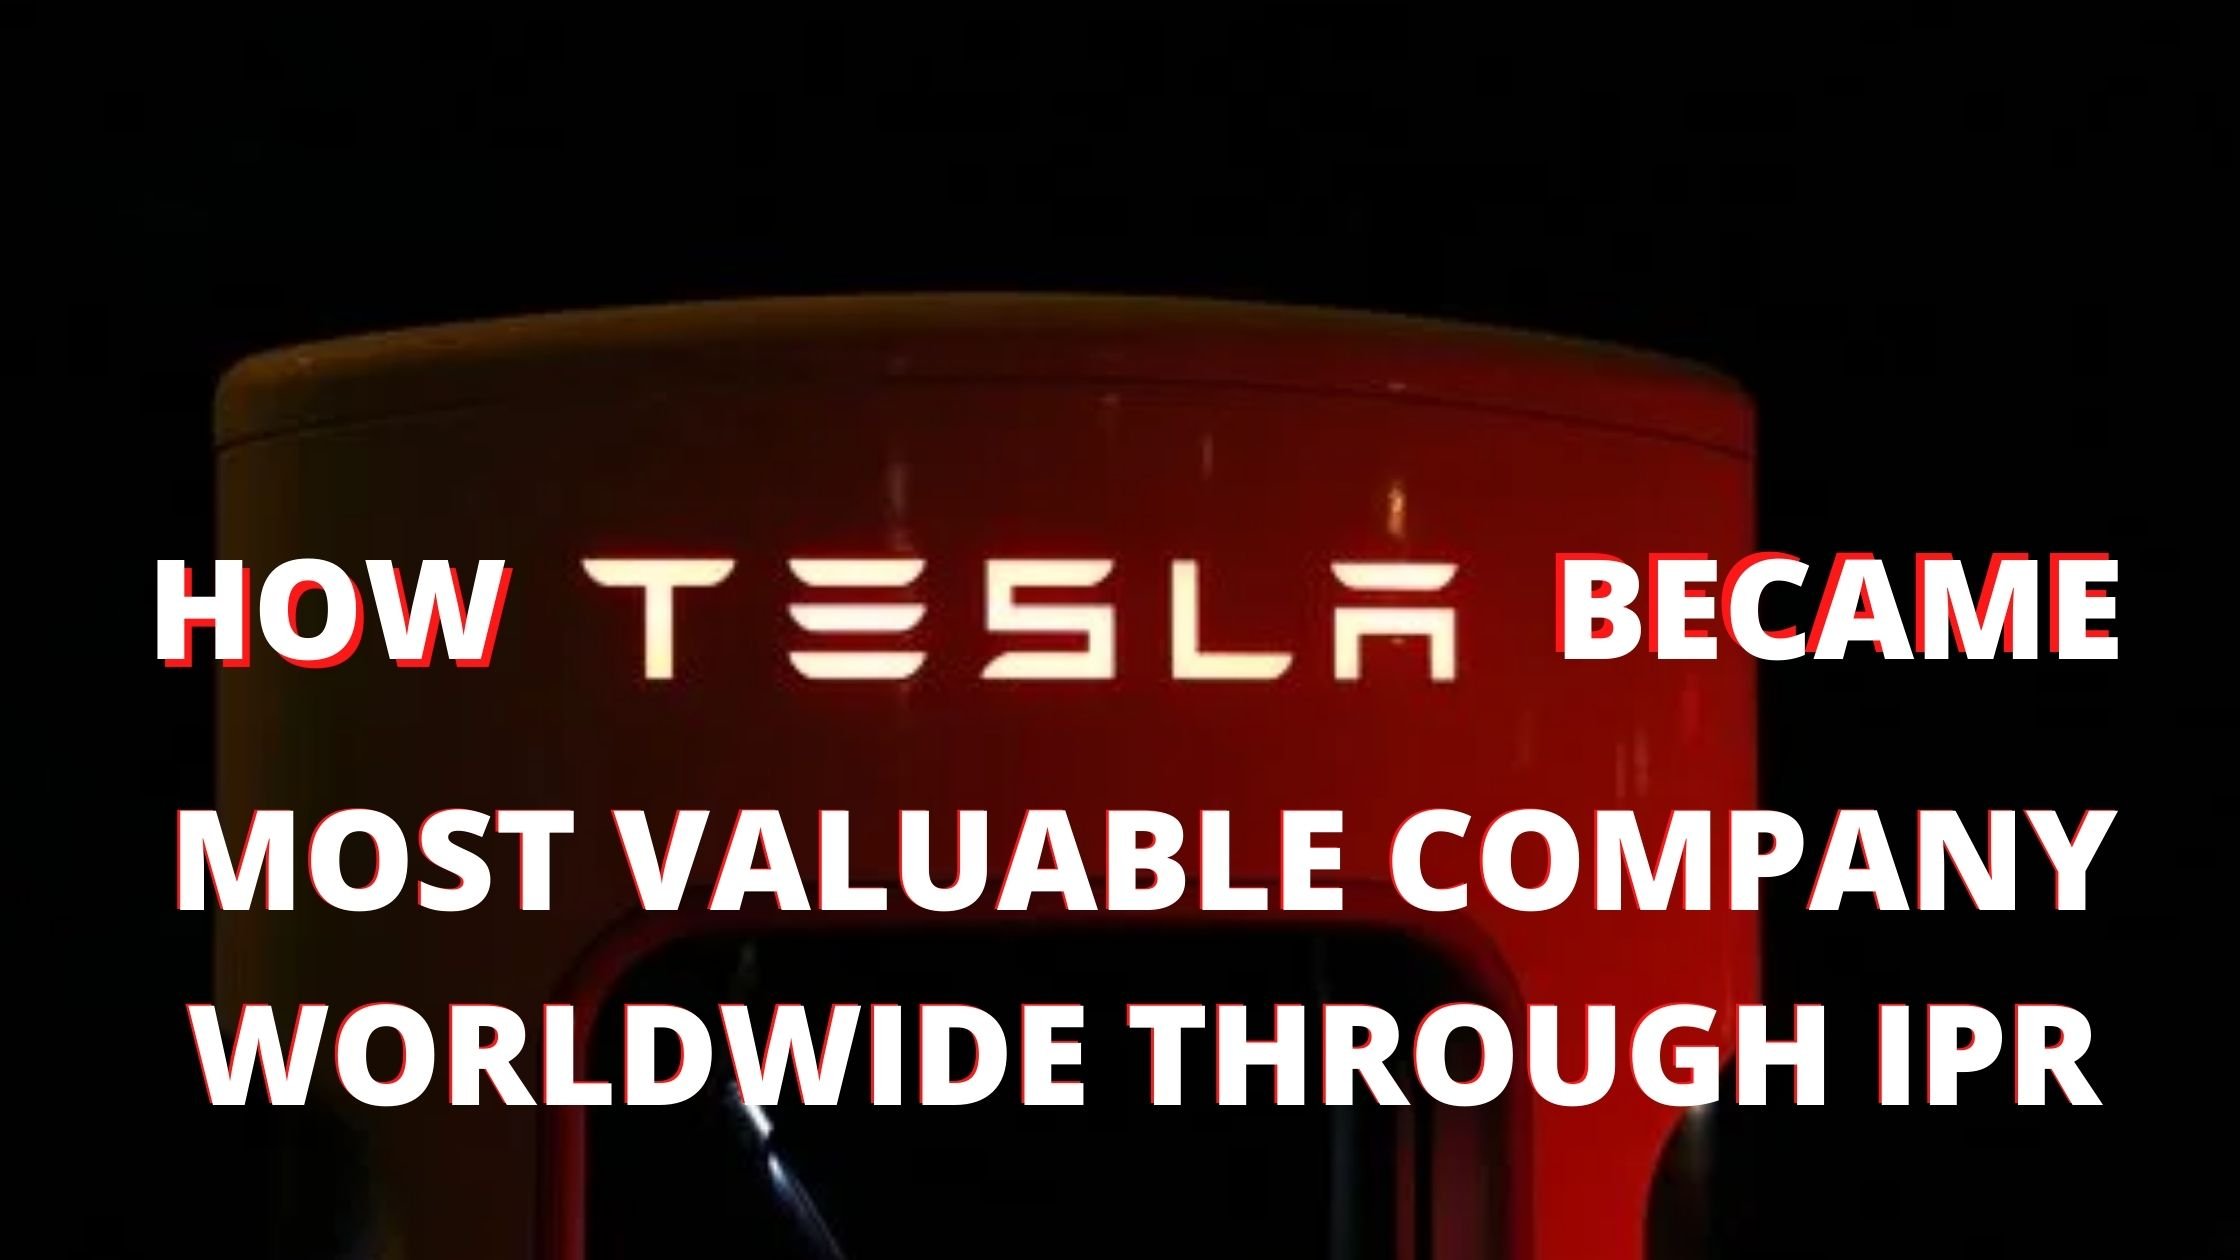 HOW TESLA BECAME THE MOST VALUABLE COMPANY AROUND THE GLOBE WITH THE HELP OF IPR